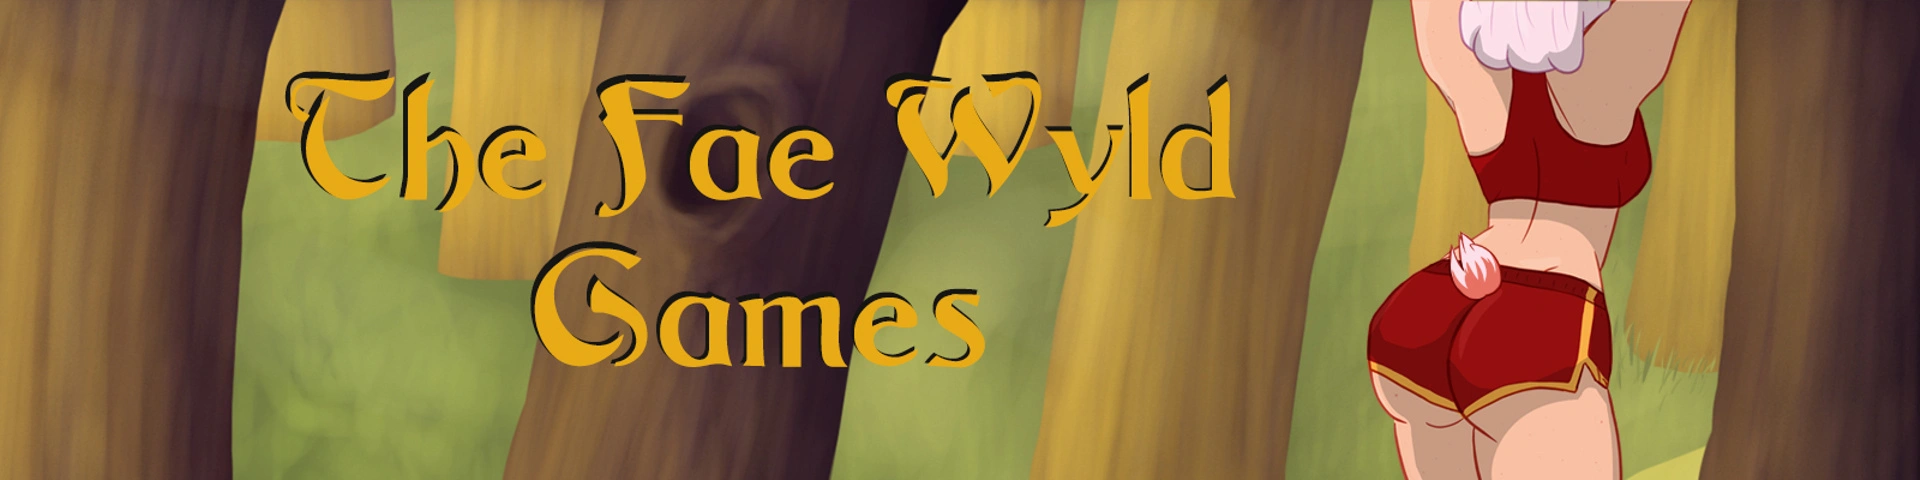 The Fae Wyld Games [v0.2 Prologue] main image